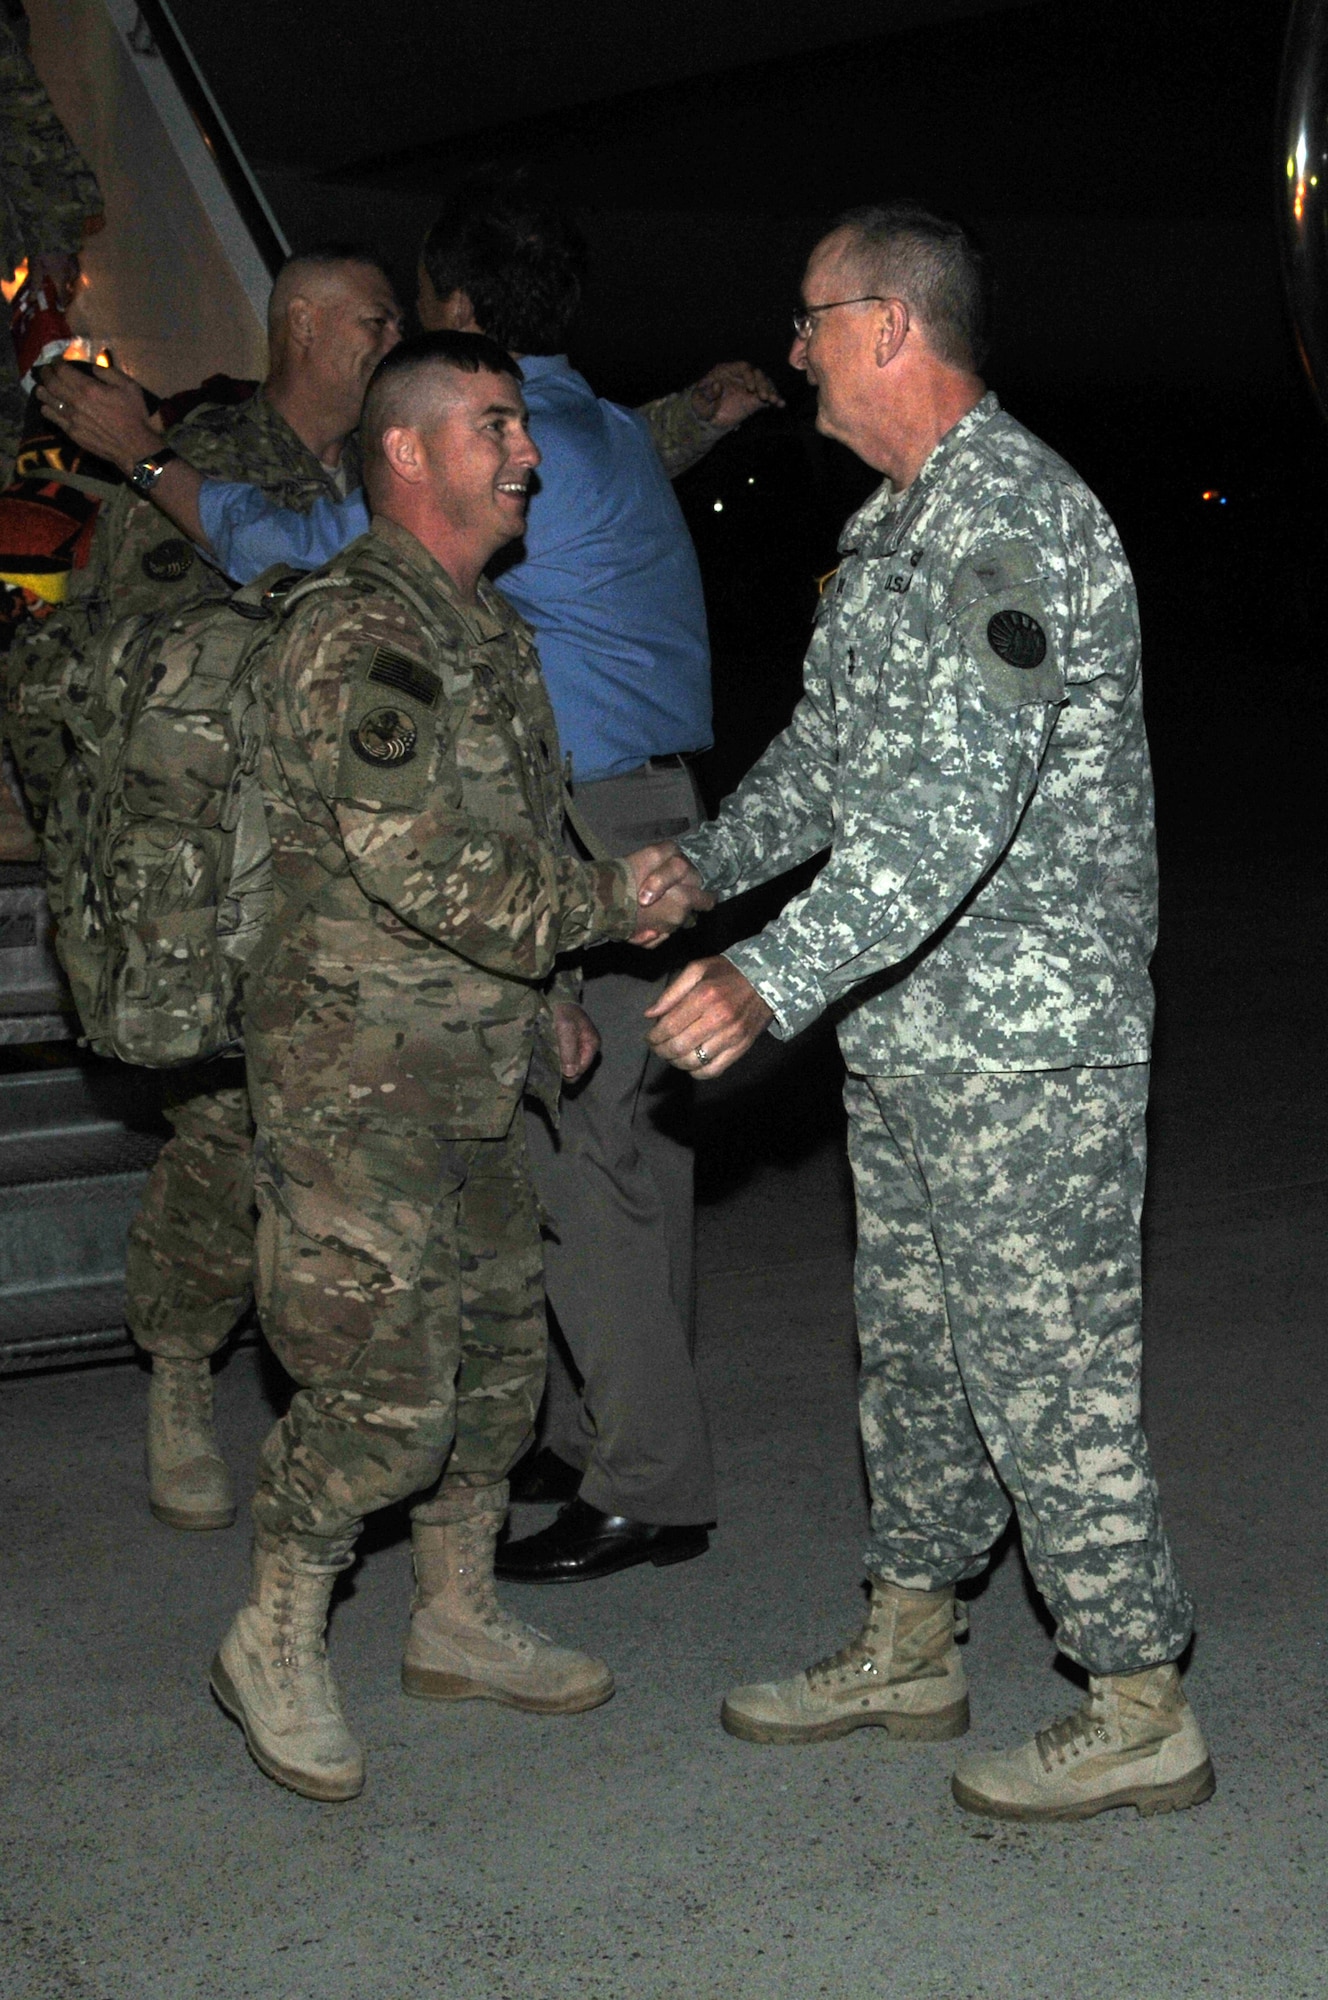 Montana Adjutant General Maj. Gen. Matthew Quinn greets 219th RED HORSE Squadron Commander Lt. Col. Rusty Vaira as he steps off of the airliner that carried him and members of the 219th RHS home from their deployment to Southwest Asia, May 7, 2016. A reception of family members and friends gathered in a hangar at Holman Aviation at the Great Falls International Airport to greet the returning Airmen. (U.S. Air National Guard photo/Senior Master Sgt. Eric Peterson)